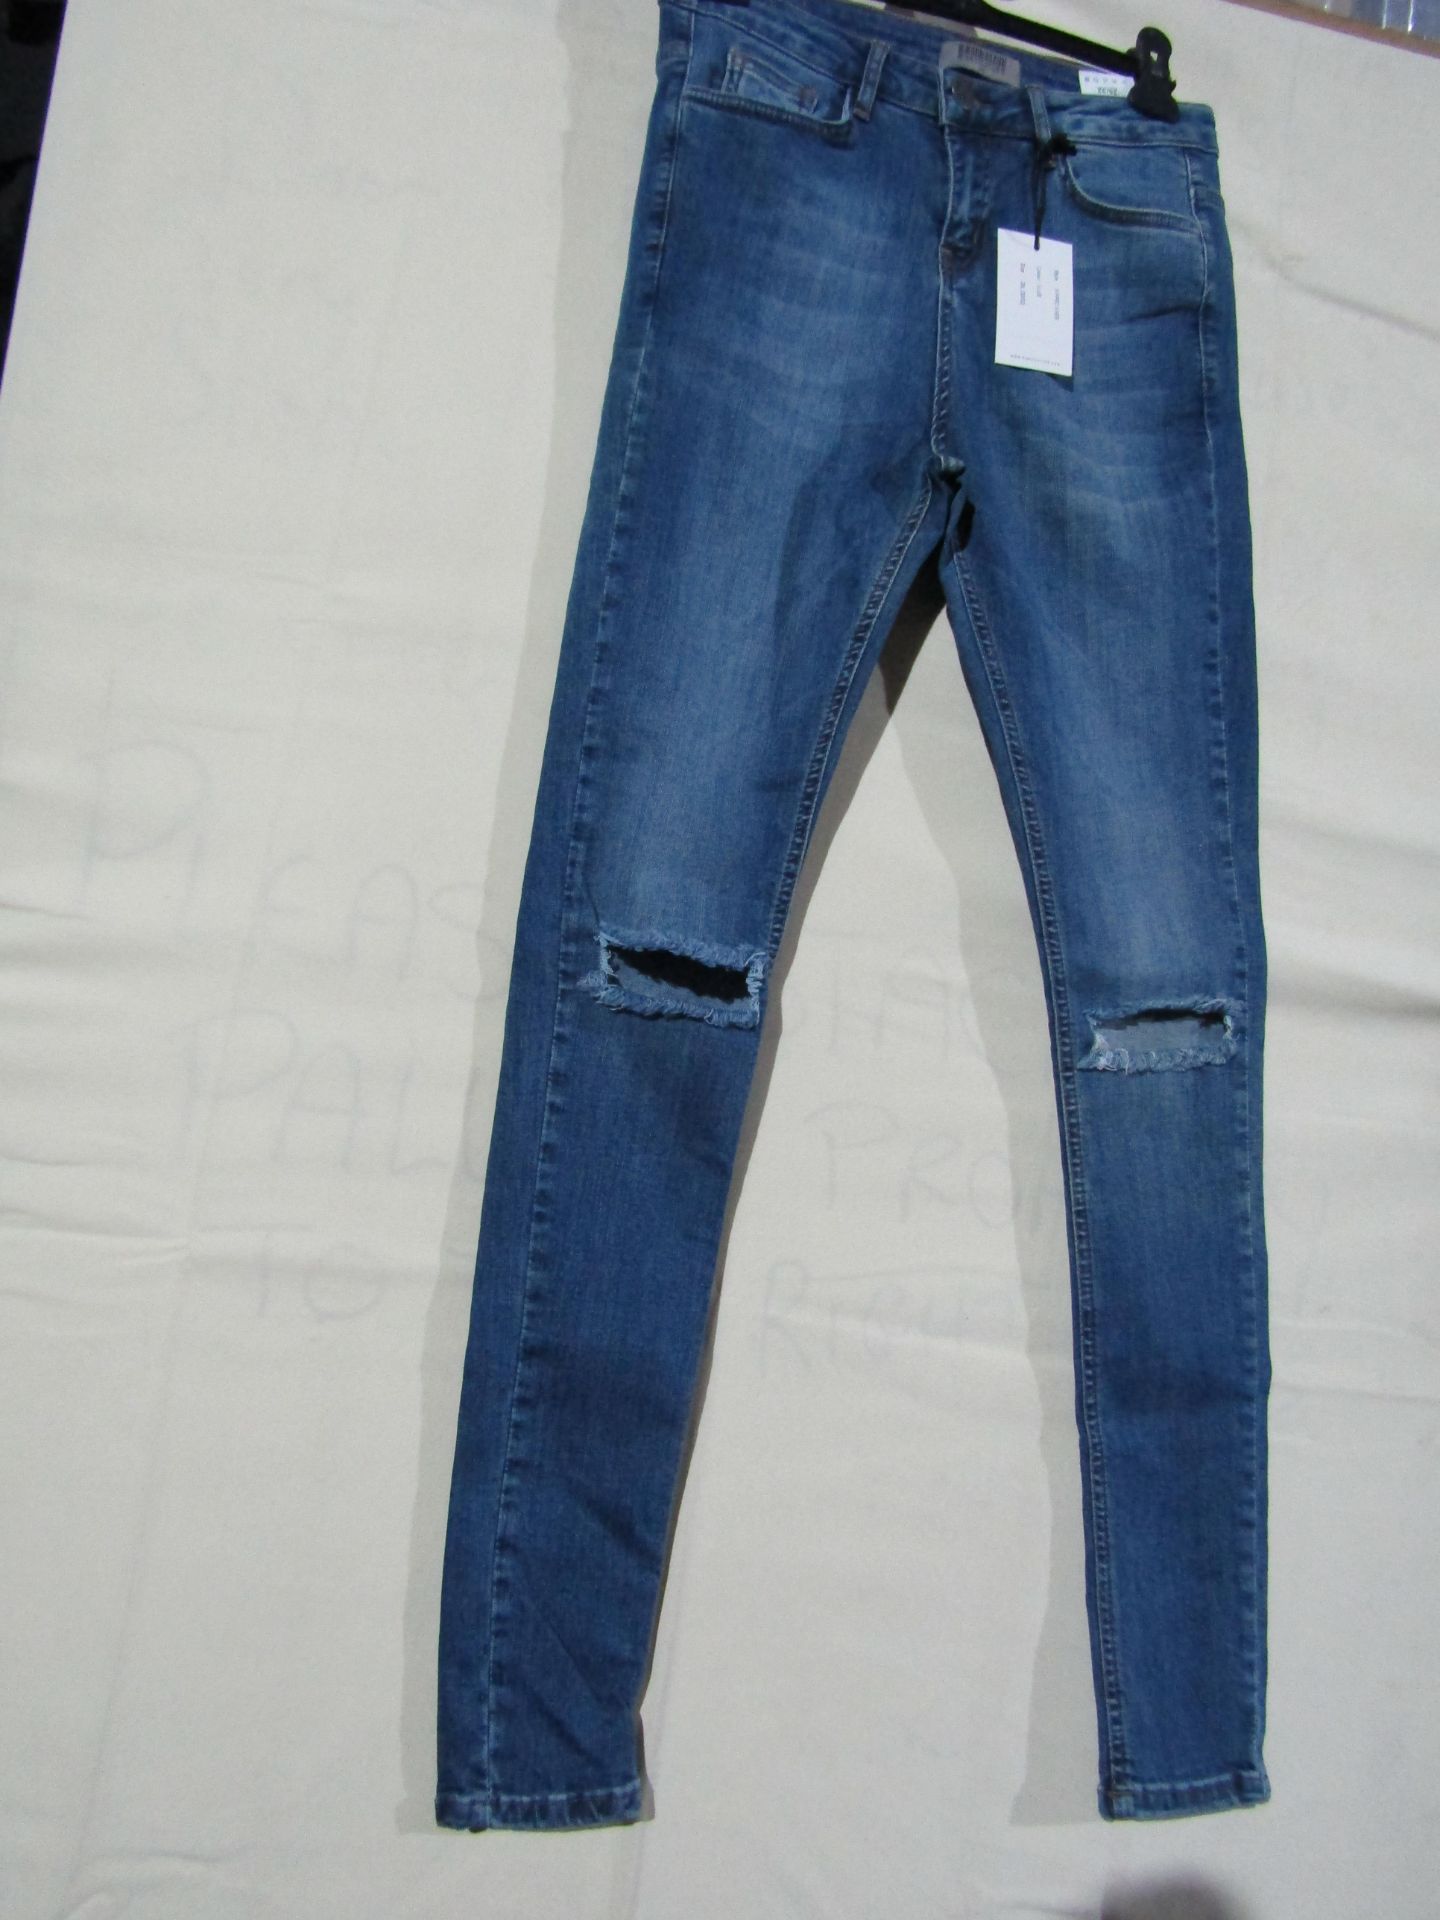 RiskCoulture Ripped Knee Skinny Jeans Size 30/30 Skinny Jeans